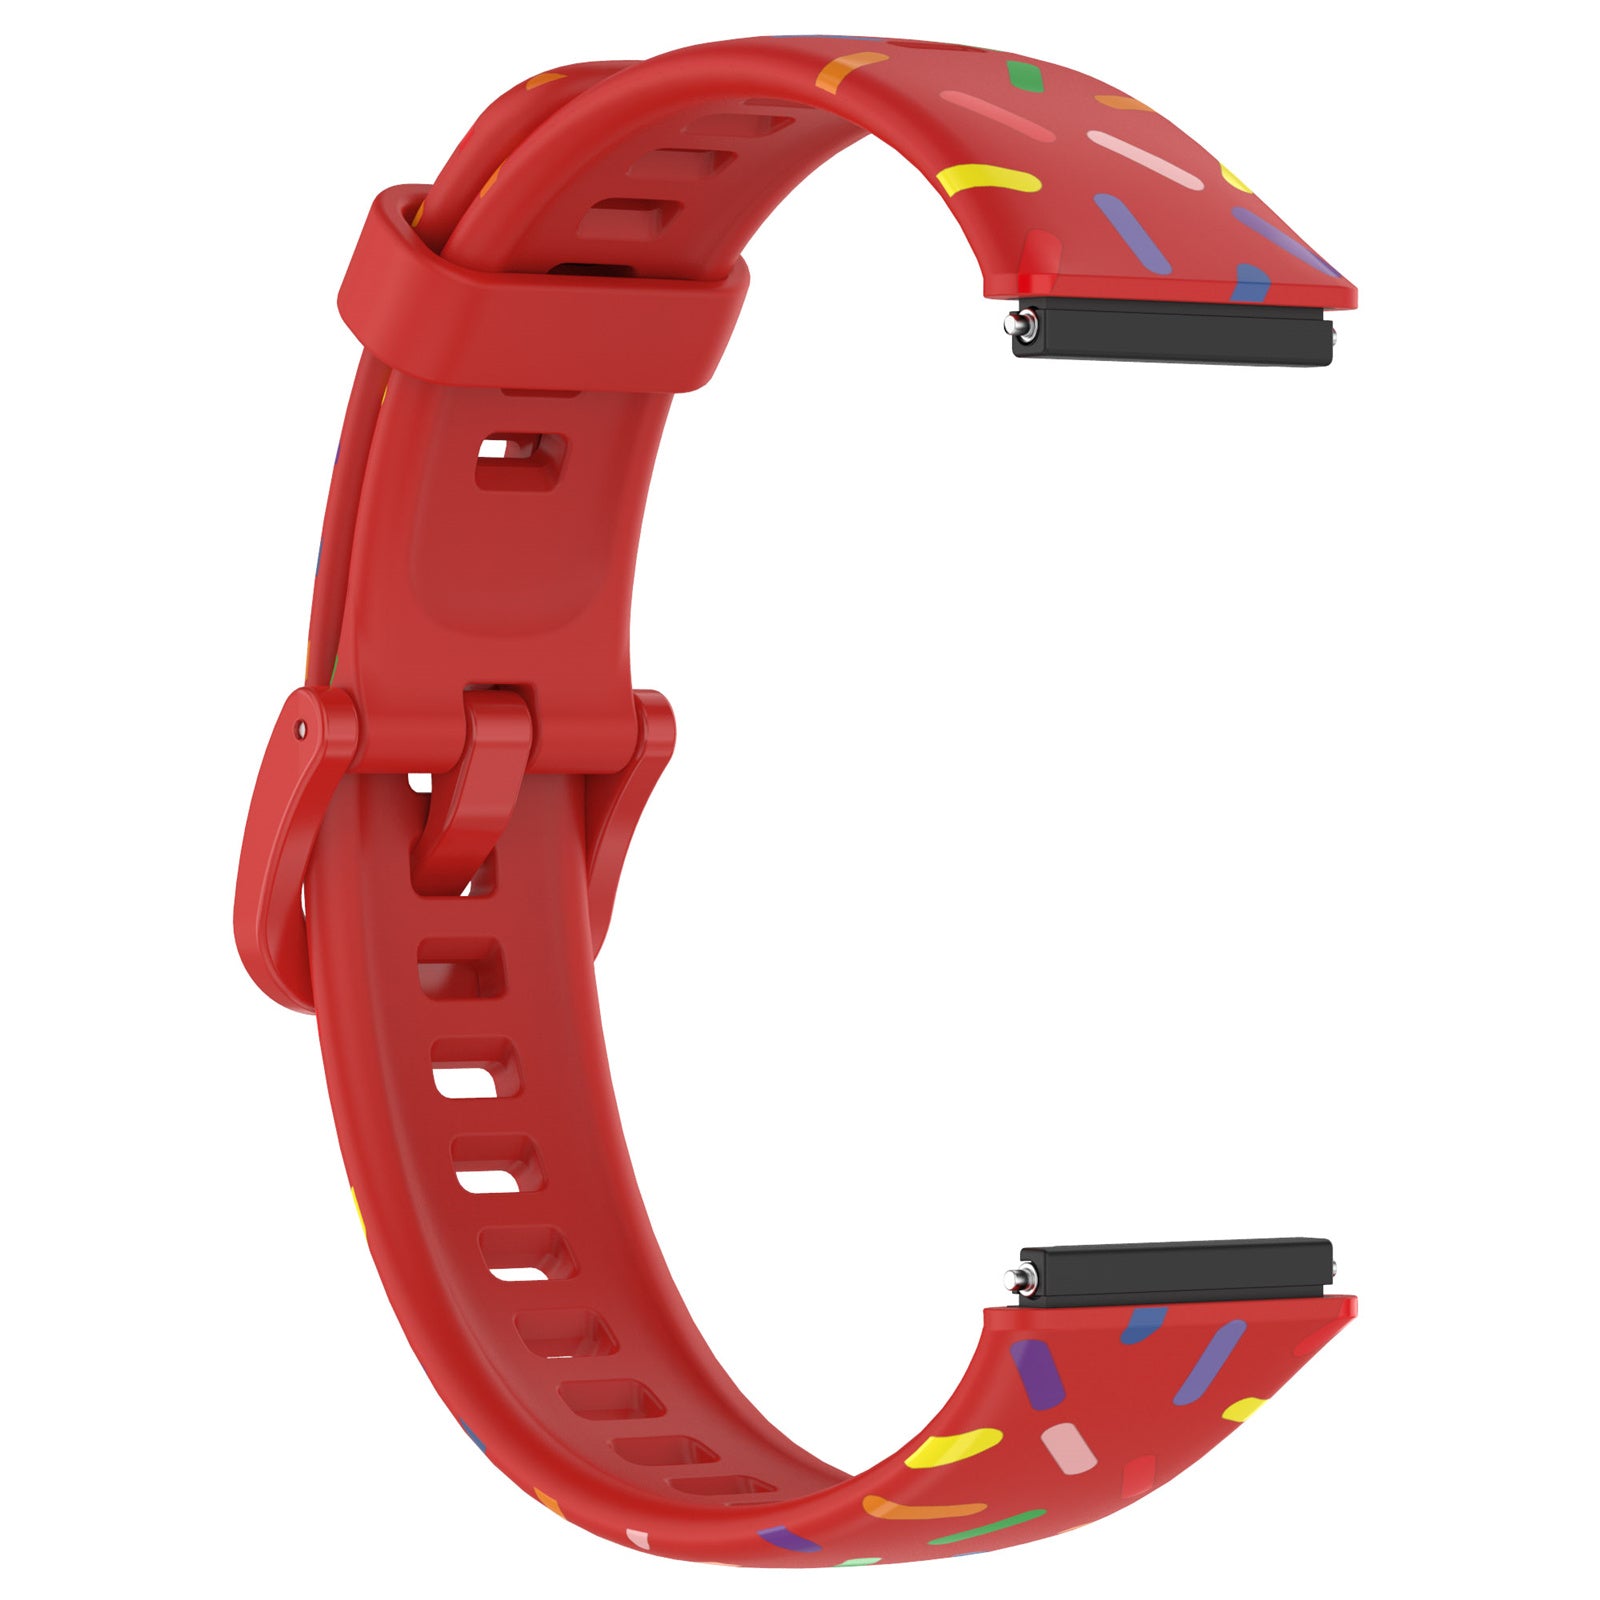 Uniqkart for Huawei Band 7 Colorful Spotted Wrist Band Replacement Silicone Watch Strap - Red